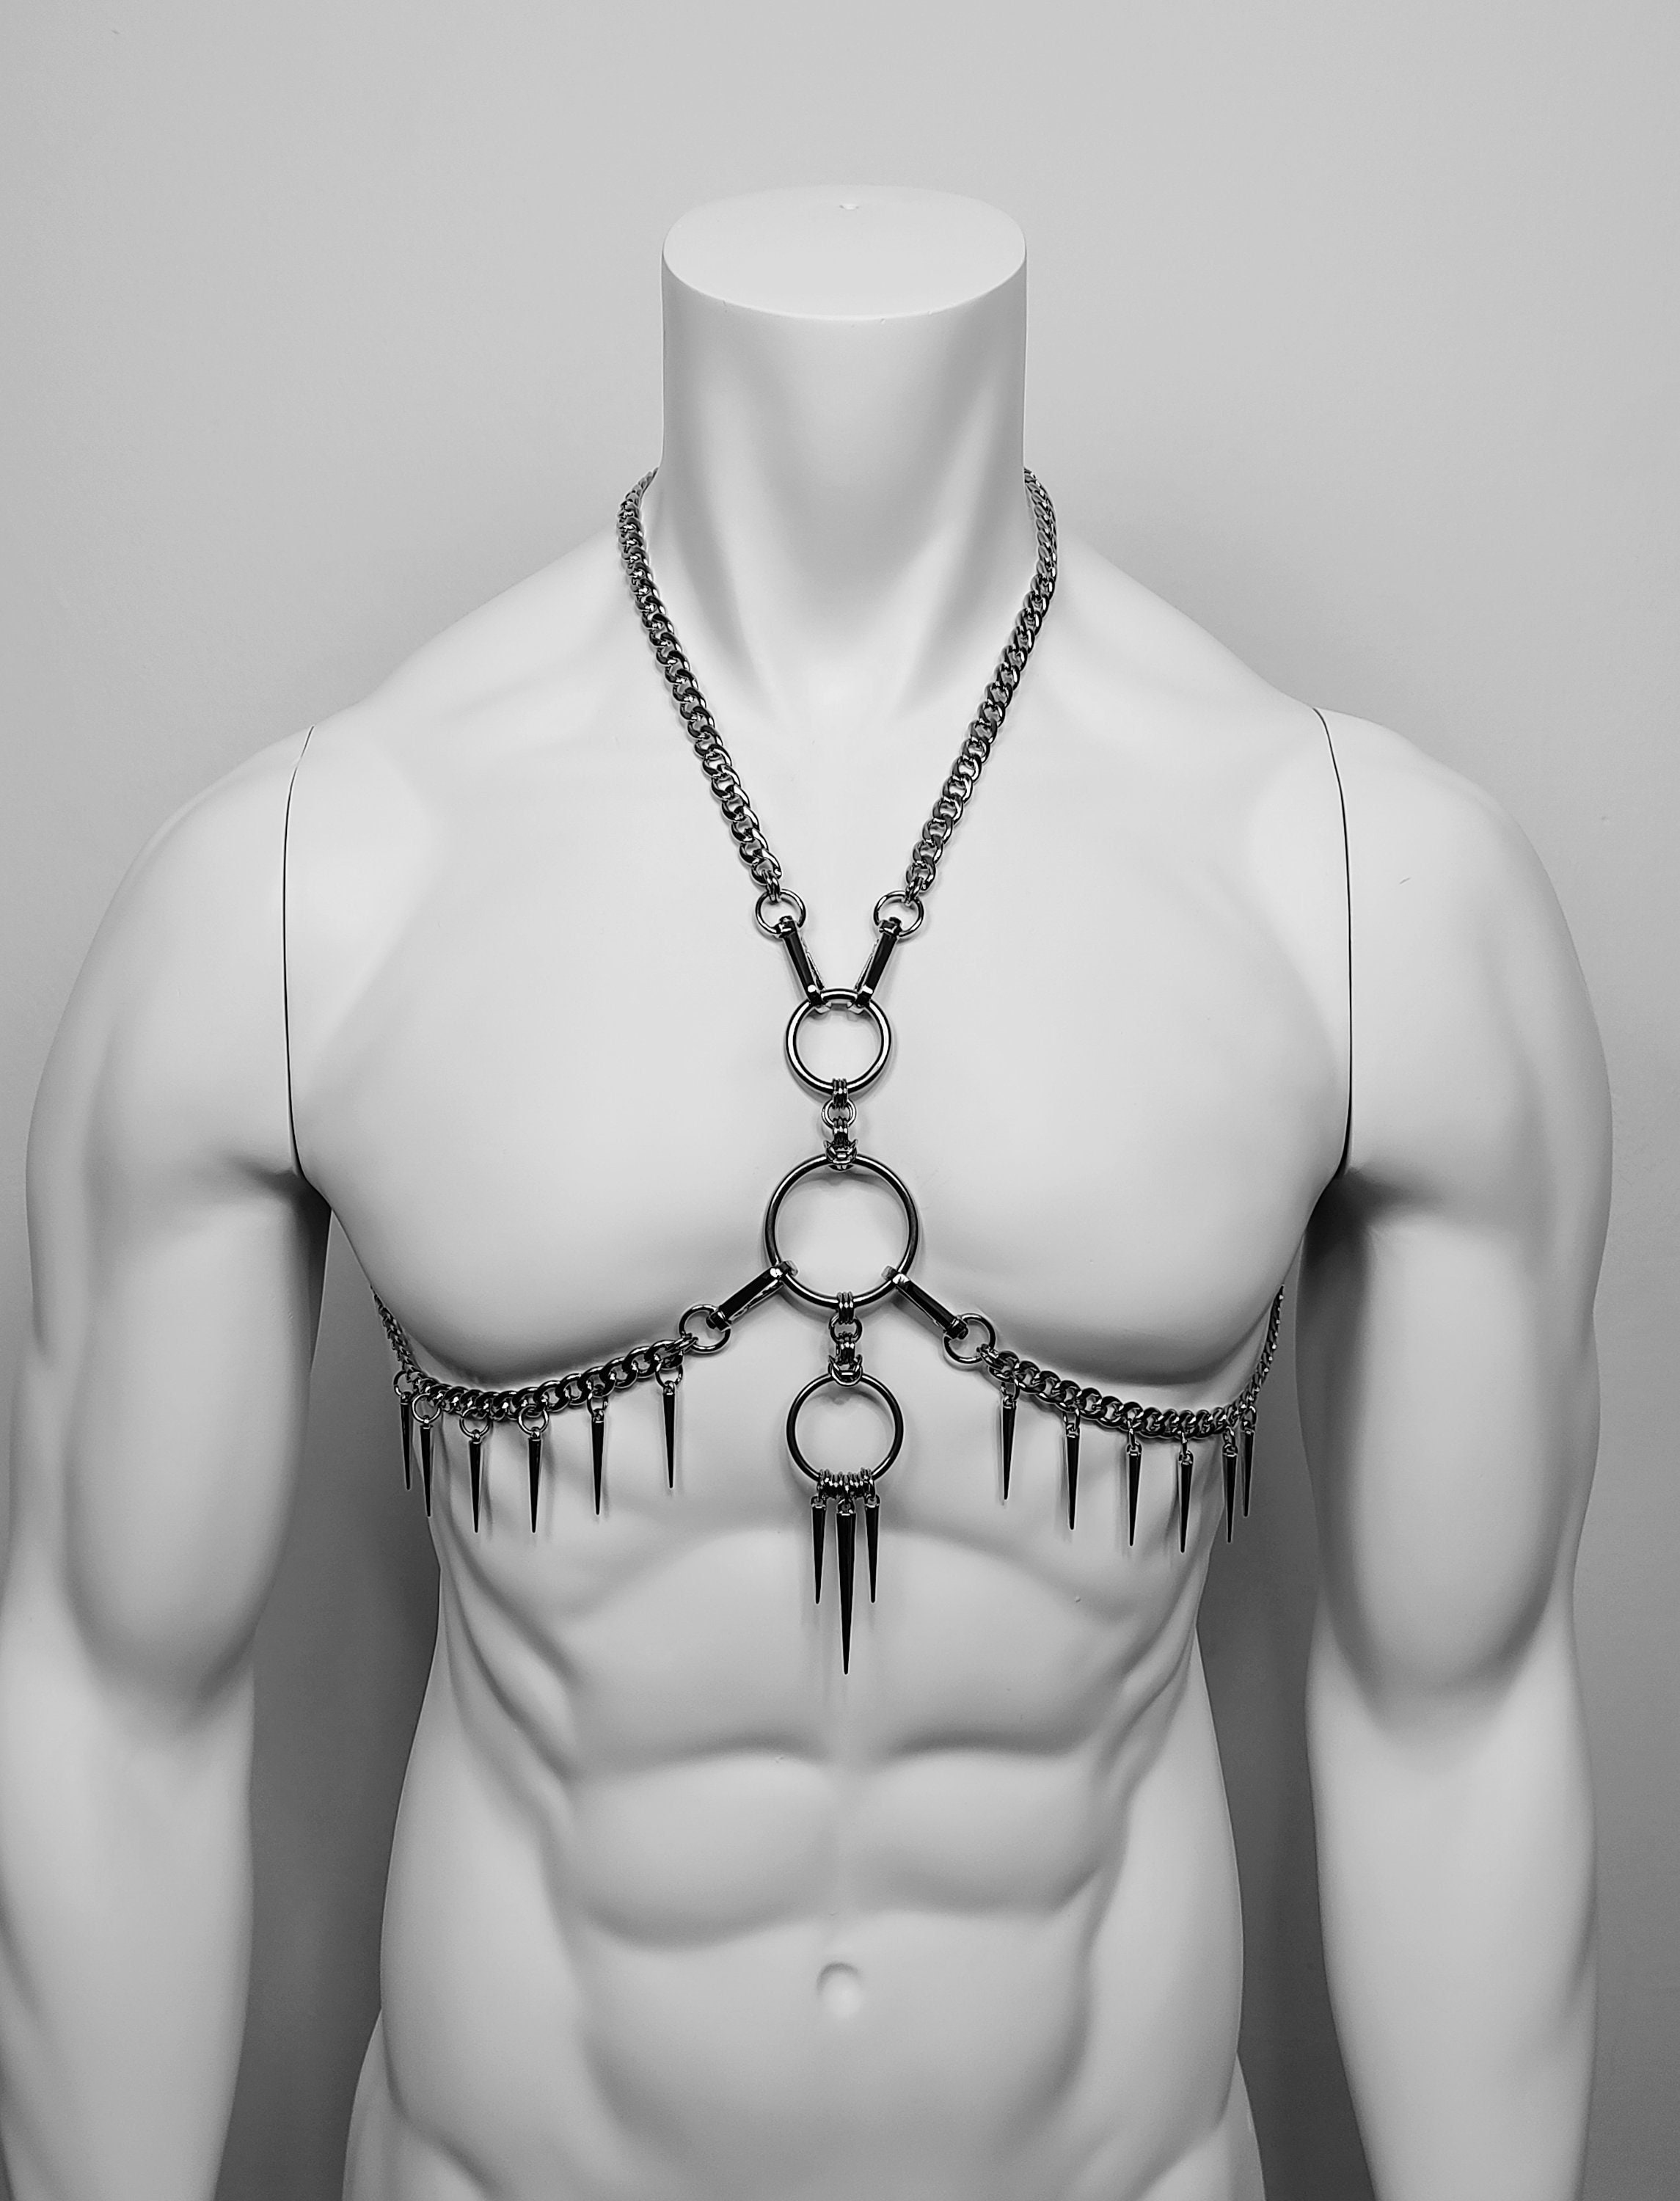 Chain Body Harness Stainless Steel Chest Harness , Metal Dream Catcher  Harness, Unisex Body Harness Handmade 